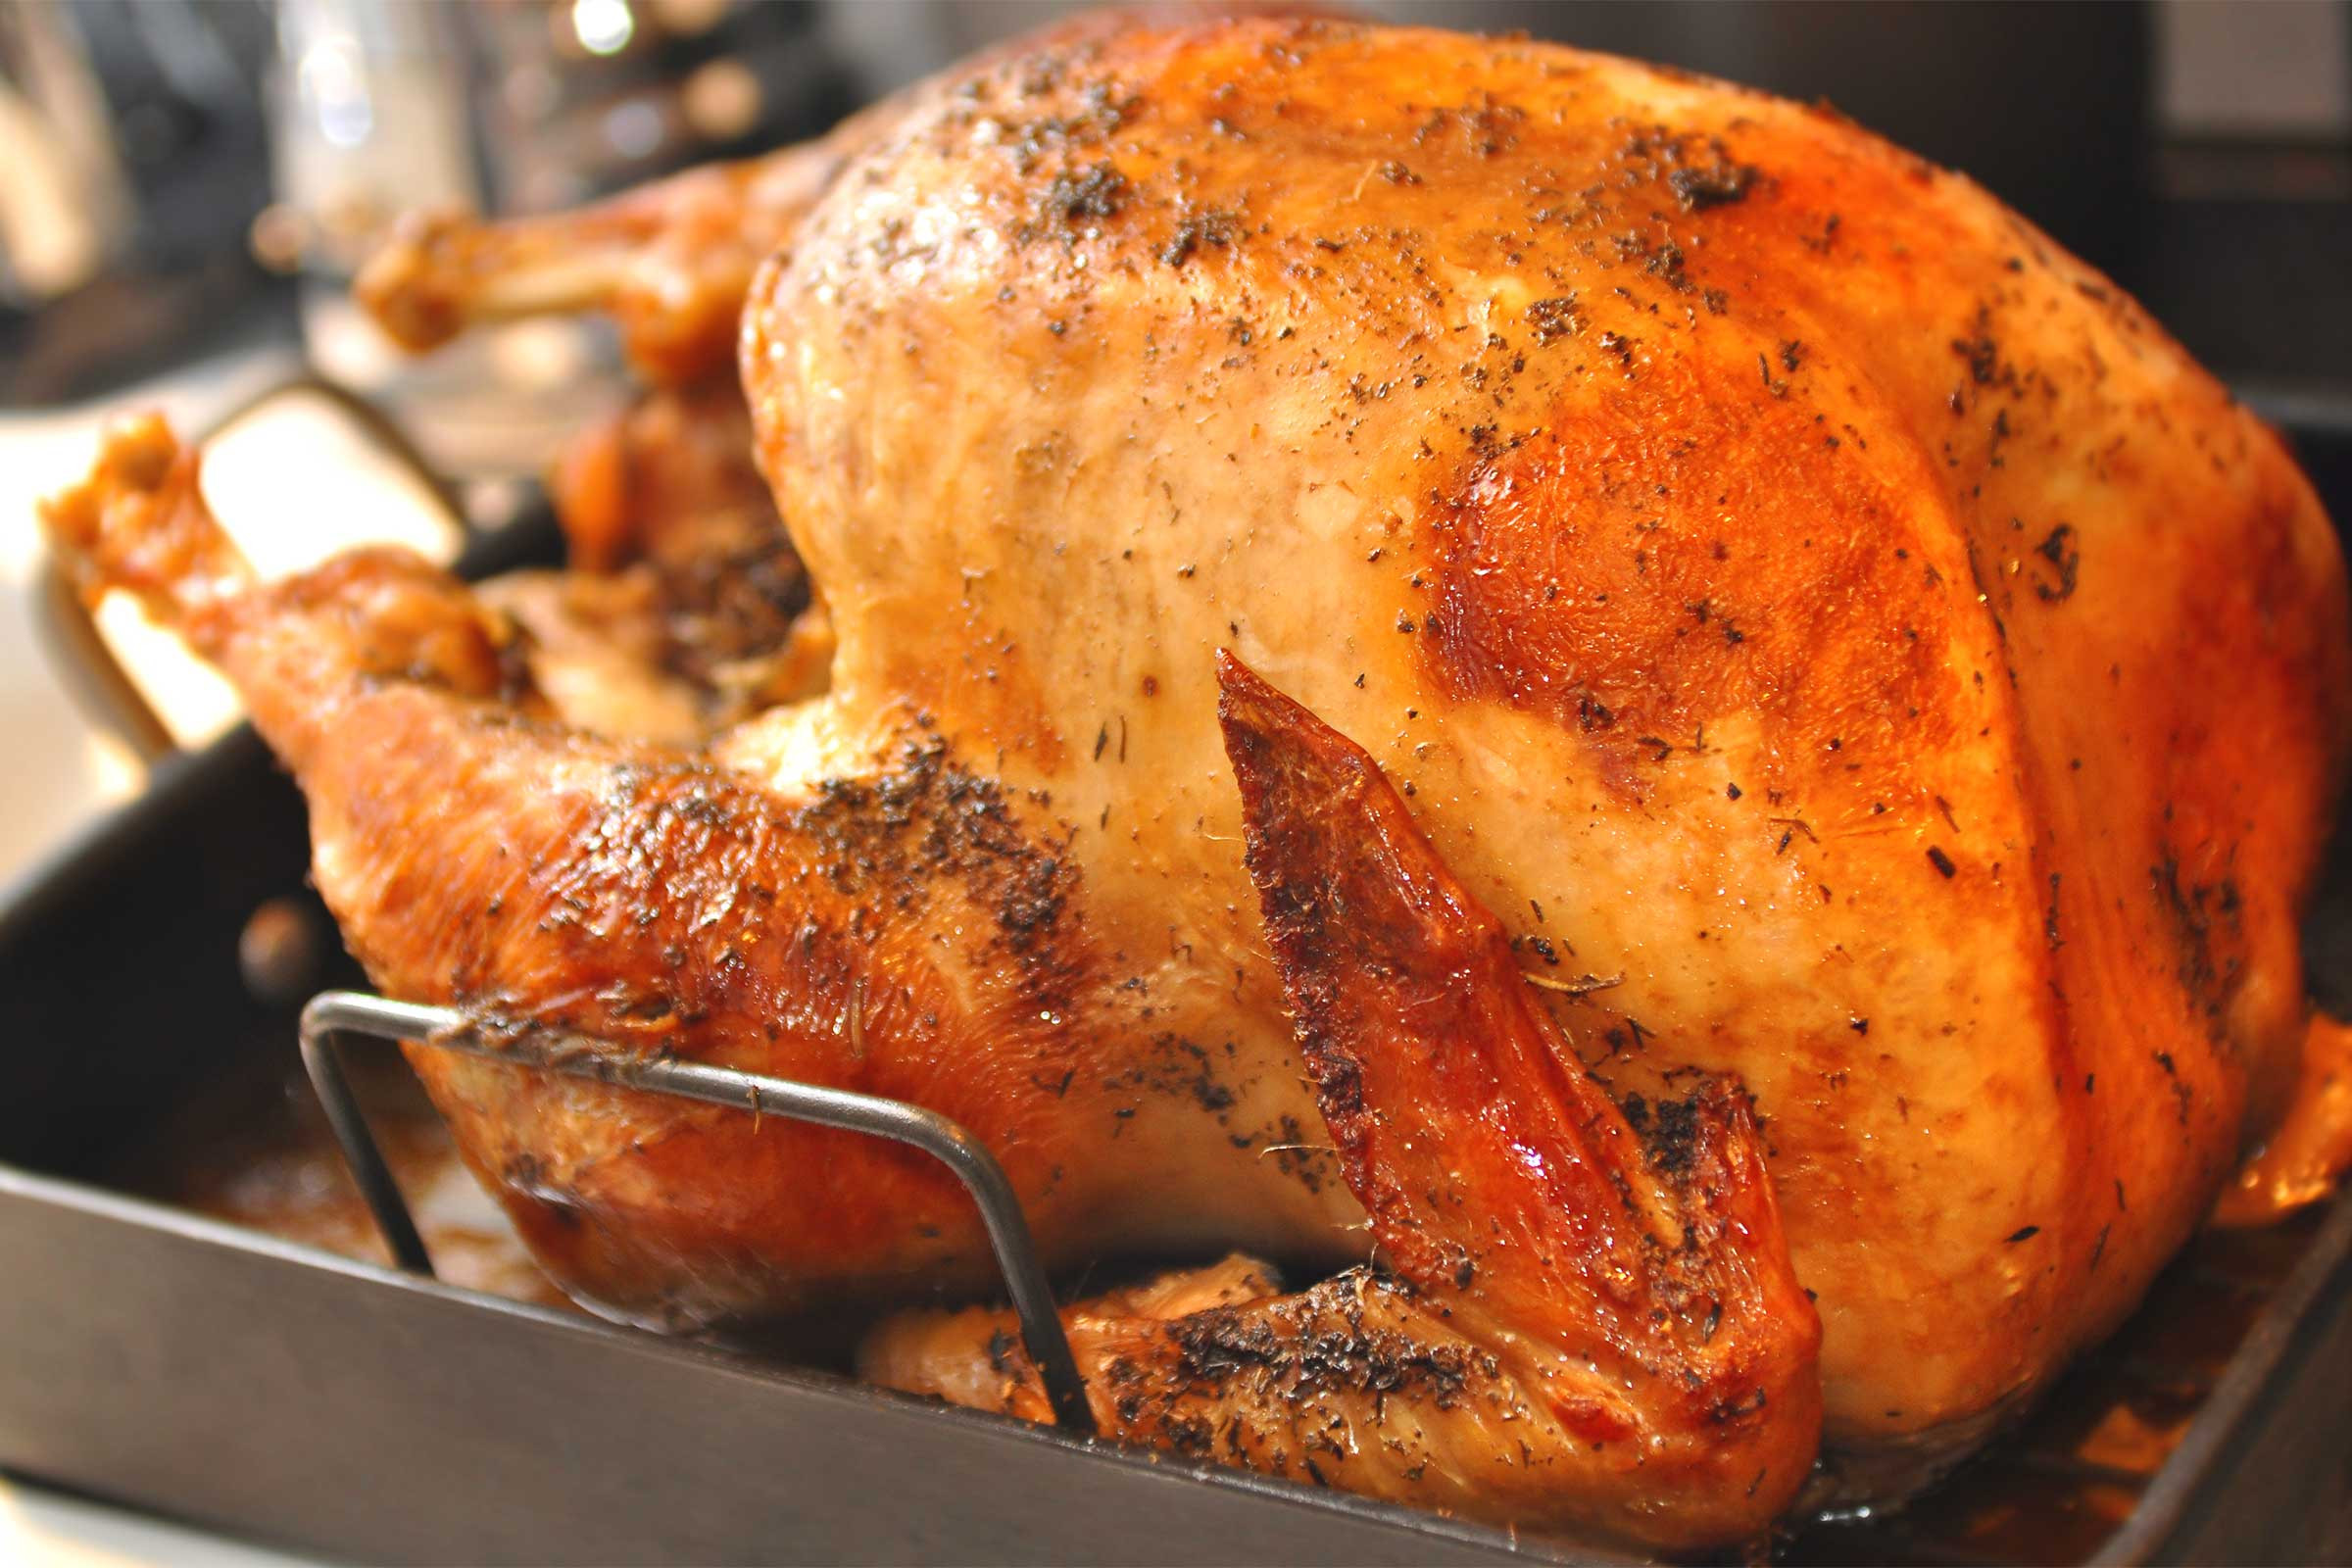 Buy A Cooked Turkey For Thanksgiving
 Tips for Buying the Perfect Turkey